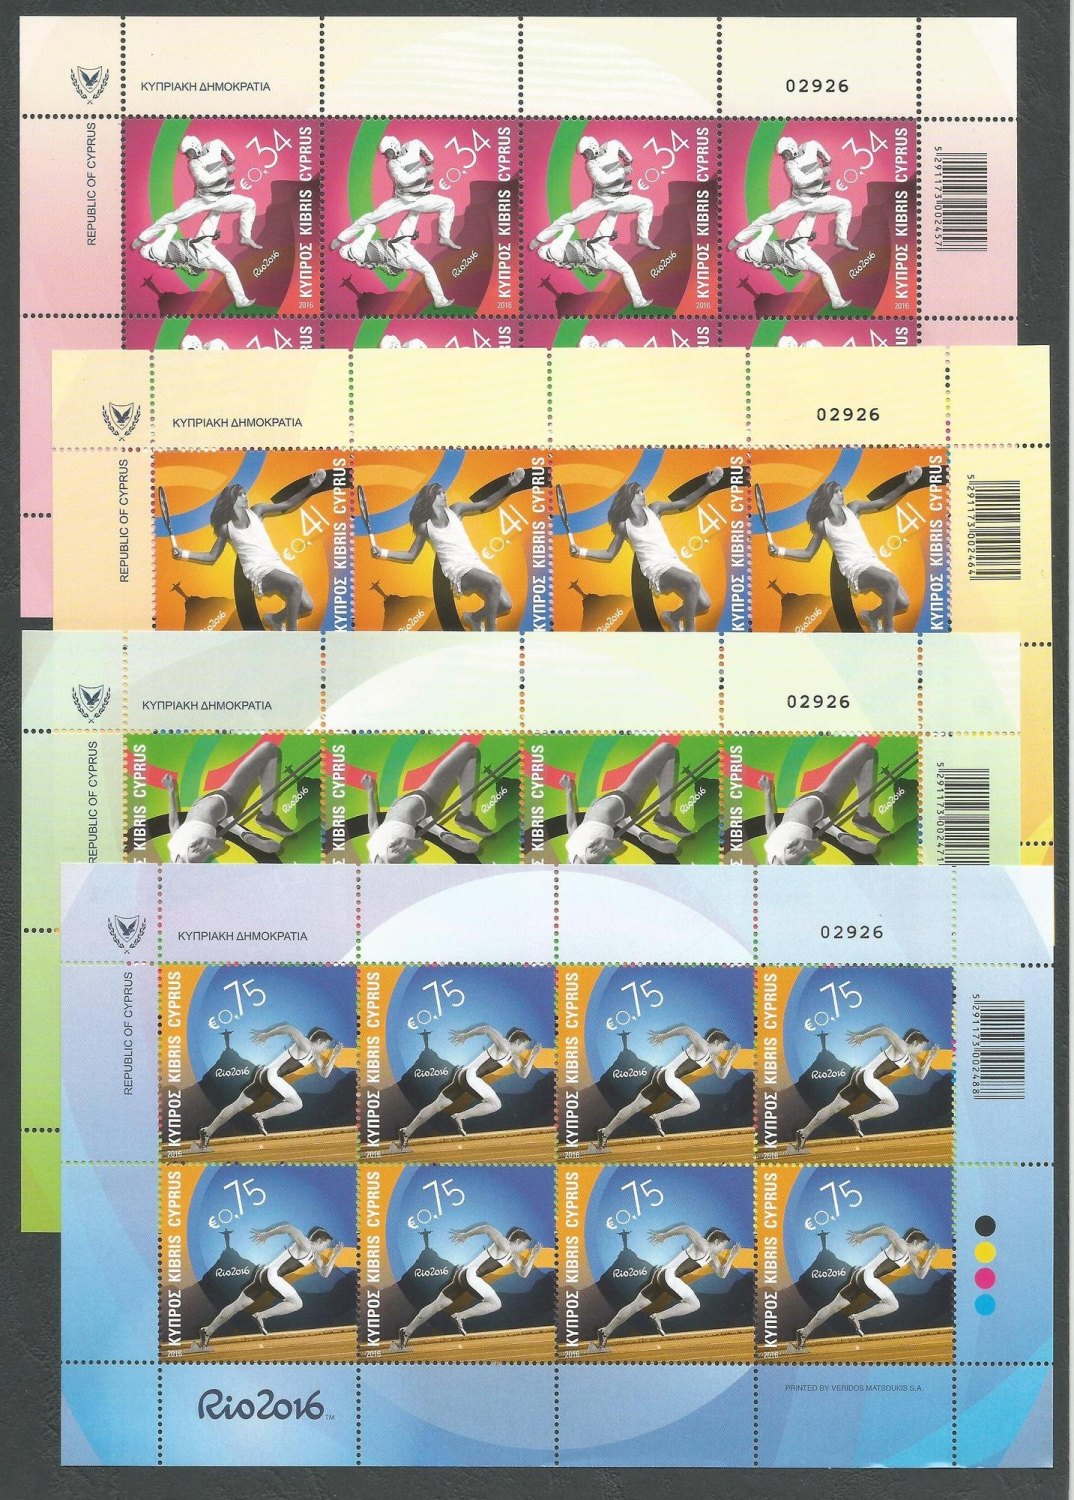 Cyprus Stamps SG 2016 (b) Rio Brazil Olympic Games - Full sheets MINT